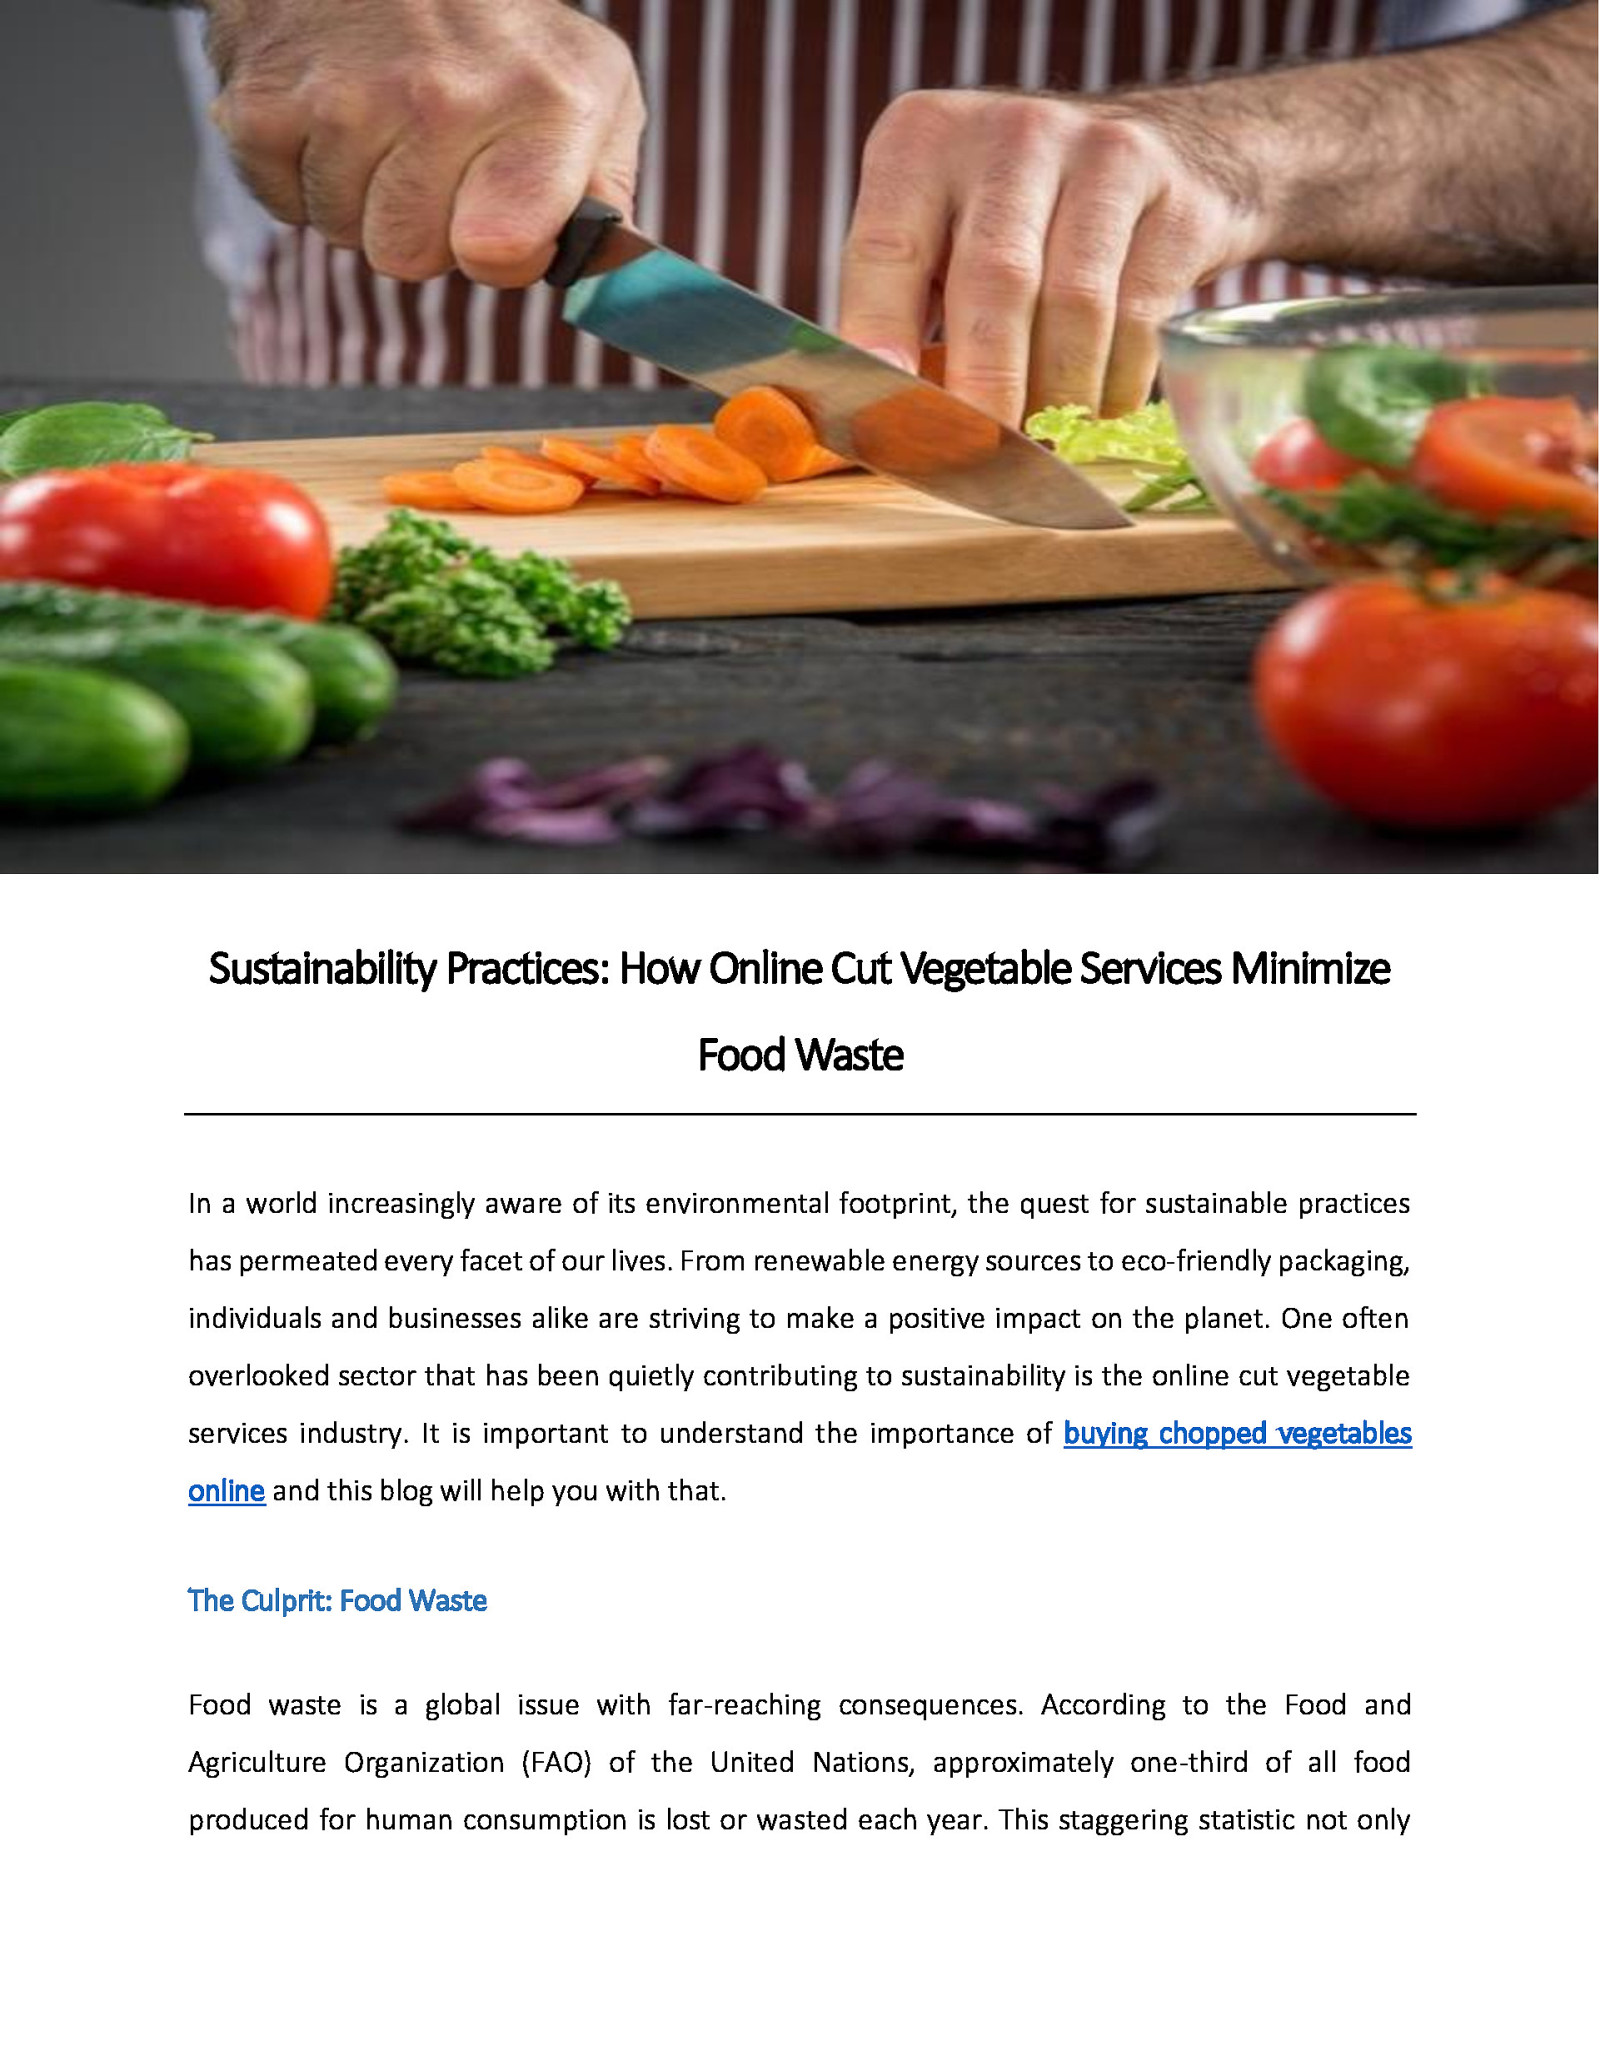 Sustainability Practices: How Online Cut Vegetable Services Minimize Food Waste